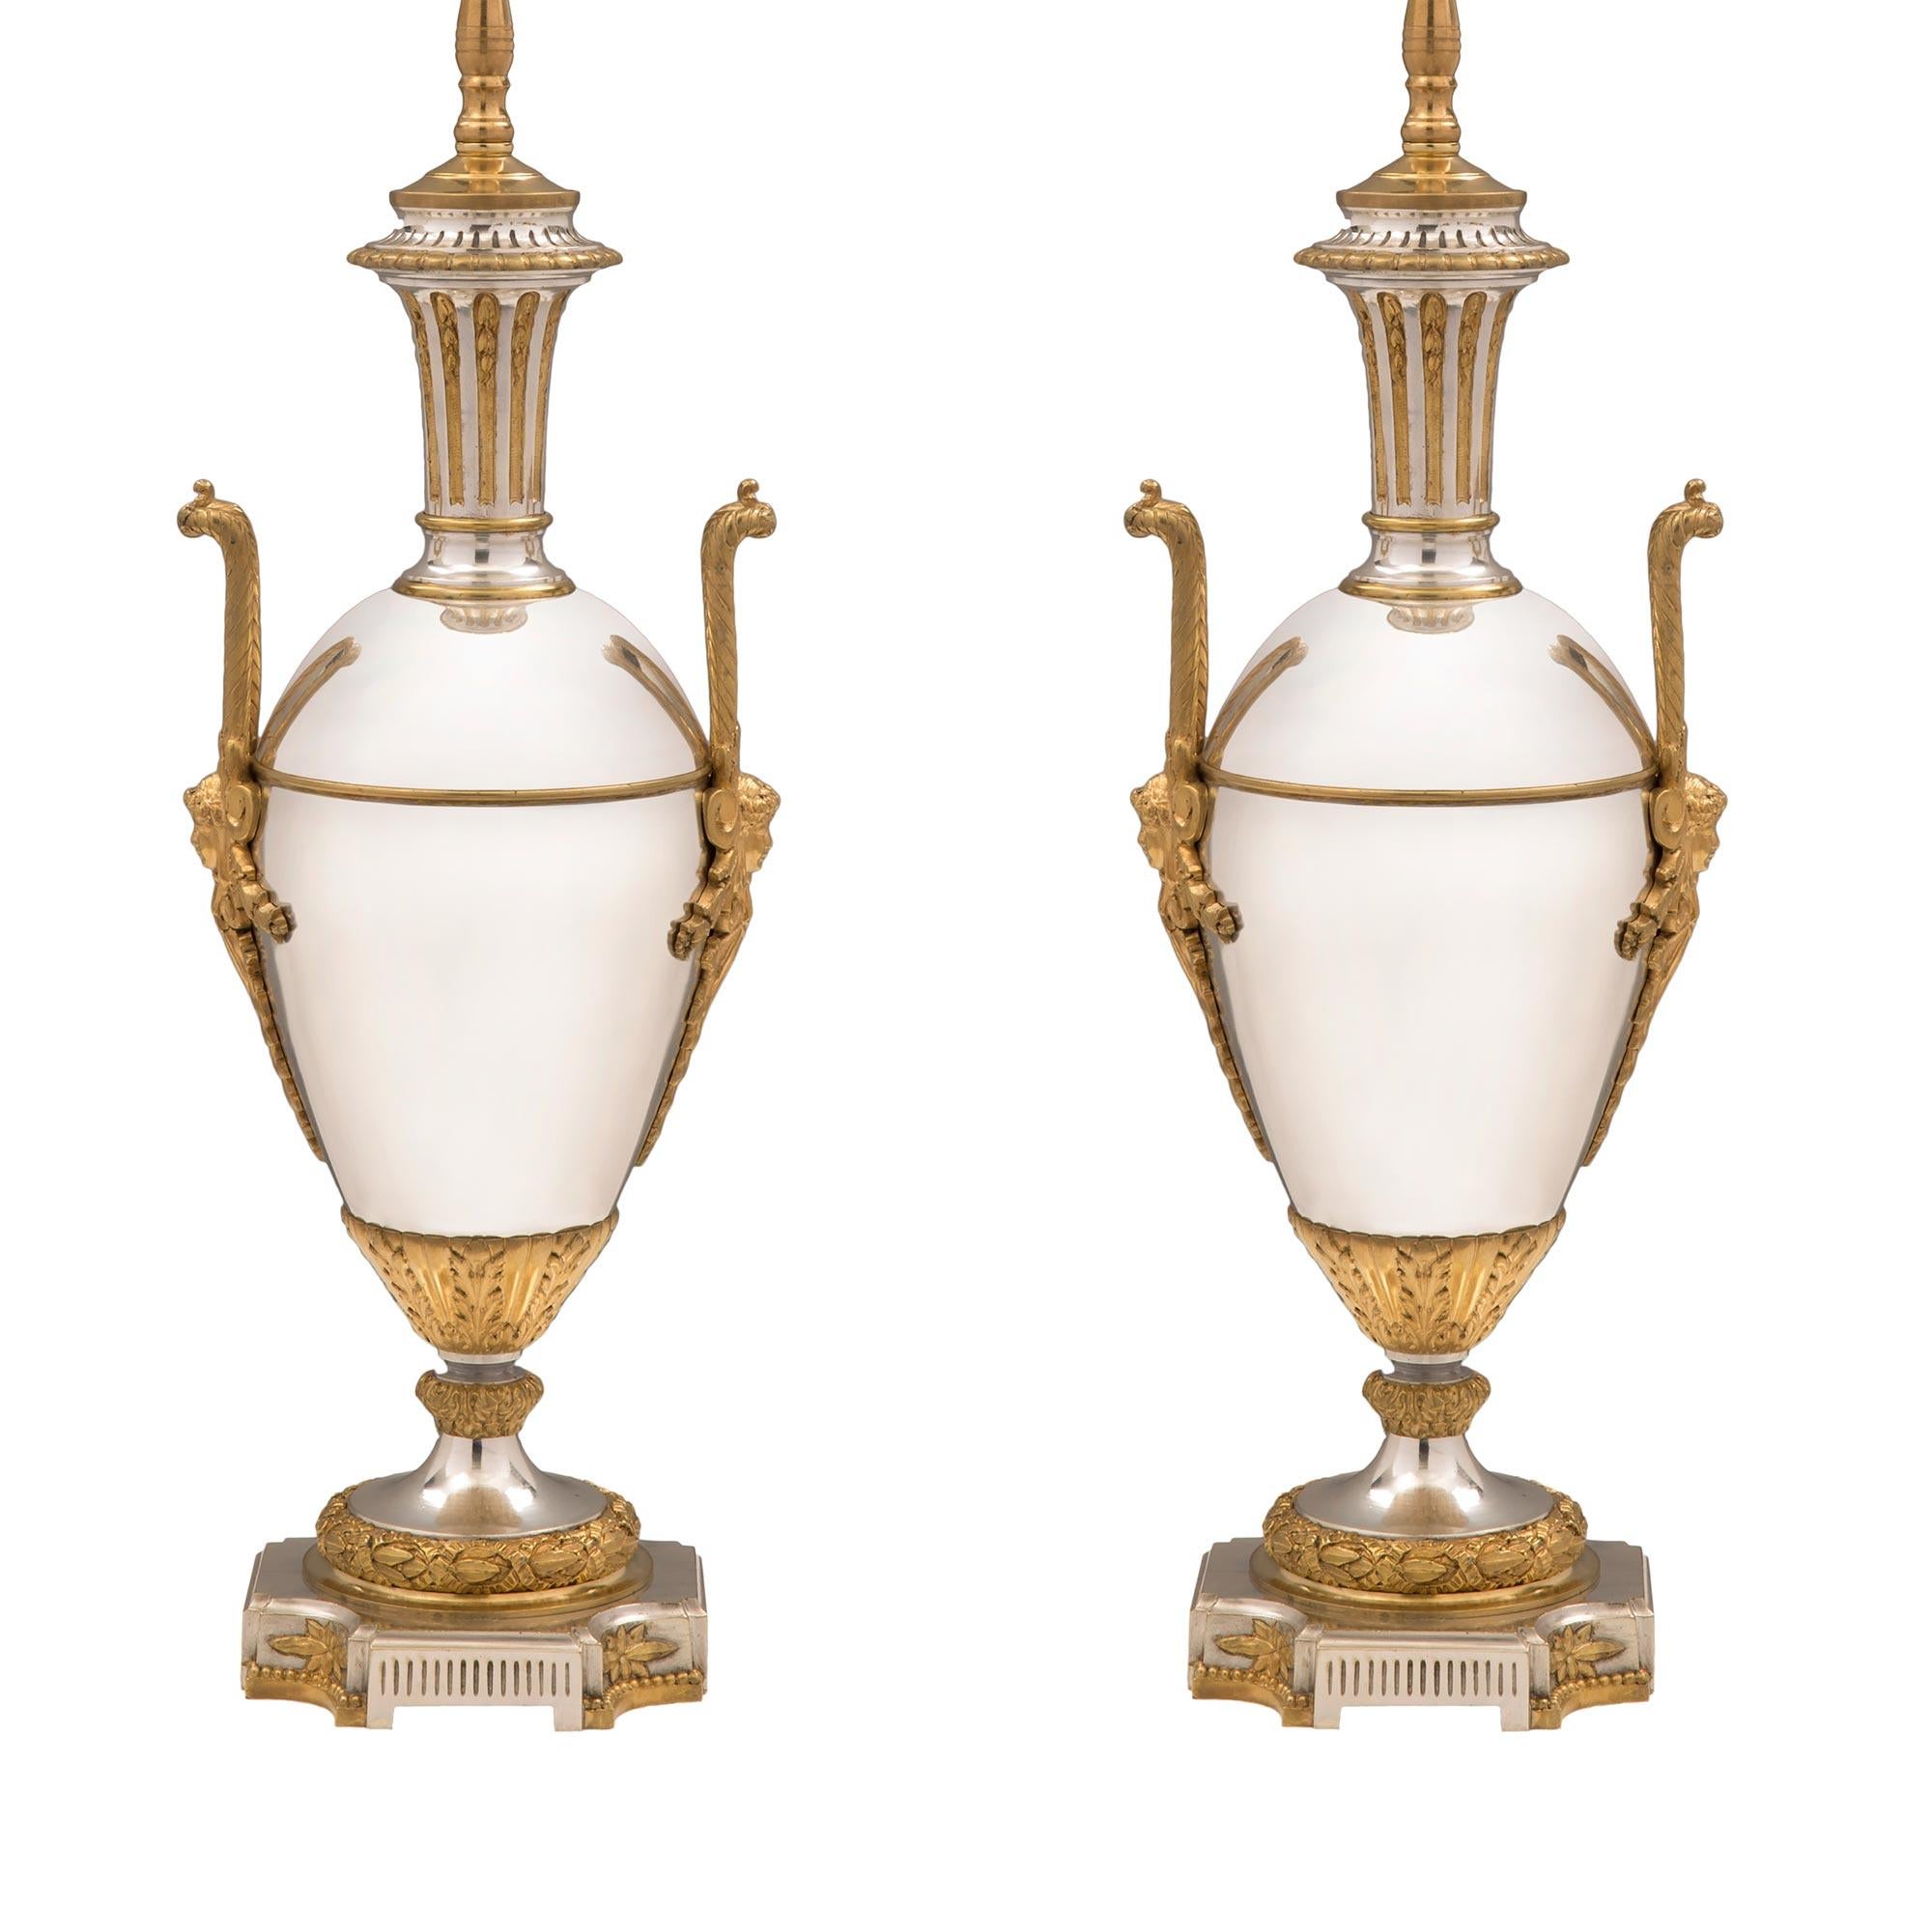 A striking and most elegant pair of French 19th century Louis XVI style silvered bronze and ormolu lamps. Each lamp is raised by a beautiful square base with concave sides and a fine fluted design with lovely floral rosettes. The socle pedestals